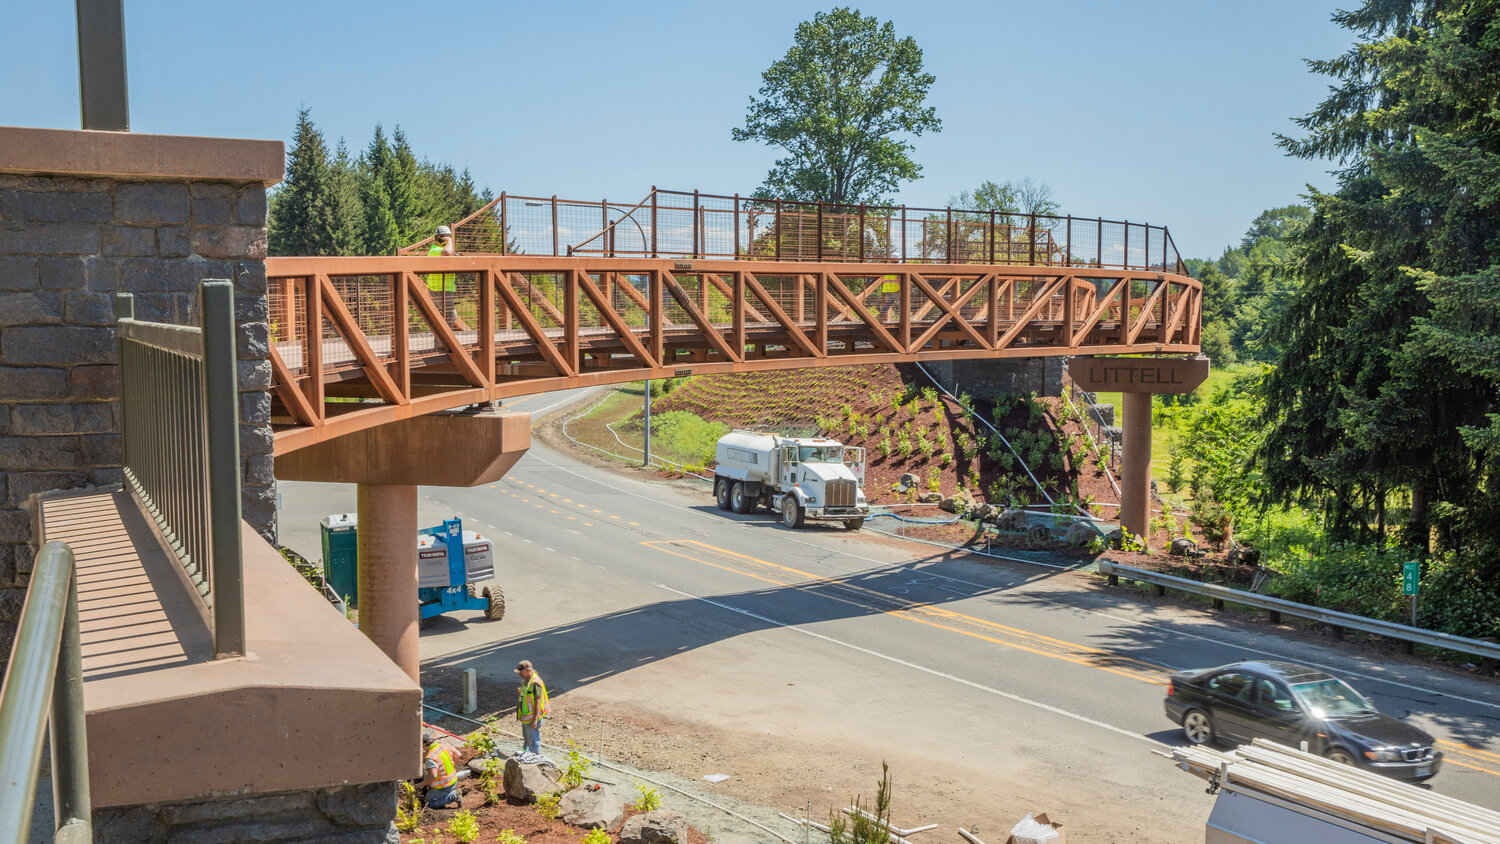 Crews put finishing touches on landscape and infrastructure surrounding the newly opened section of the Willapa Hills State Park Trail in Littell on Friday, June 2.